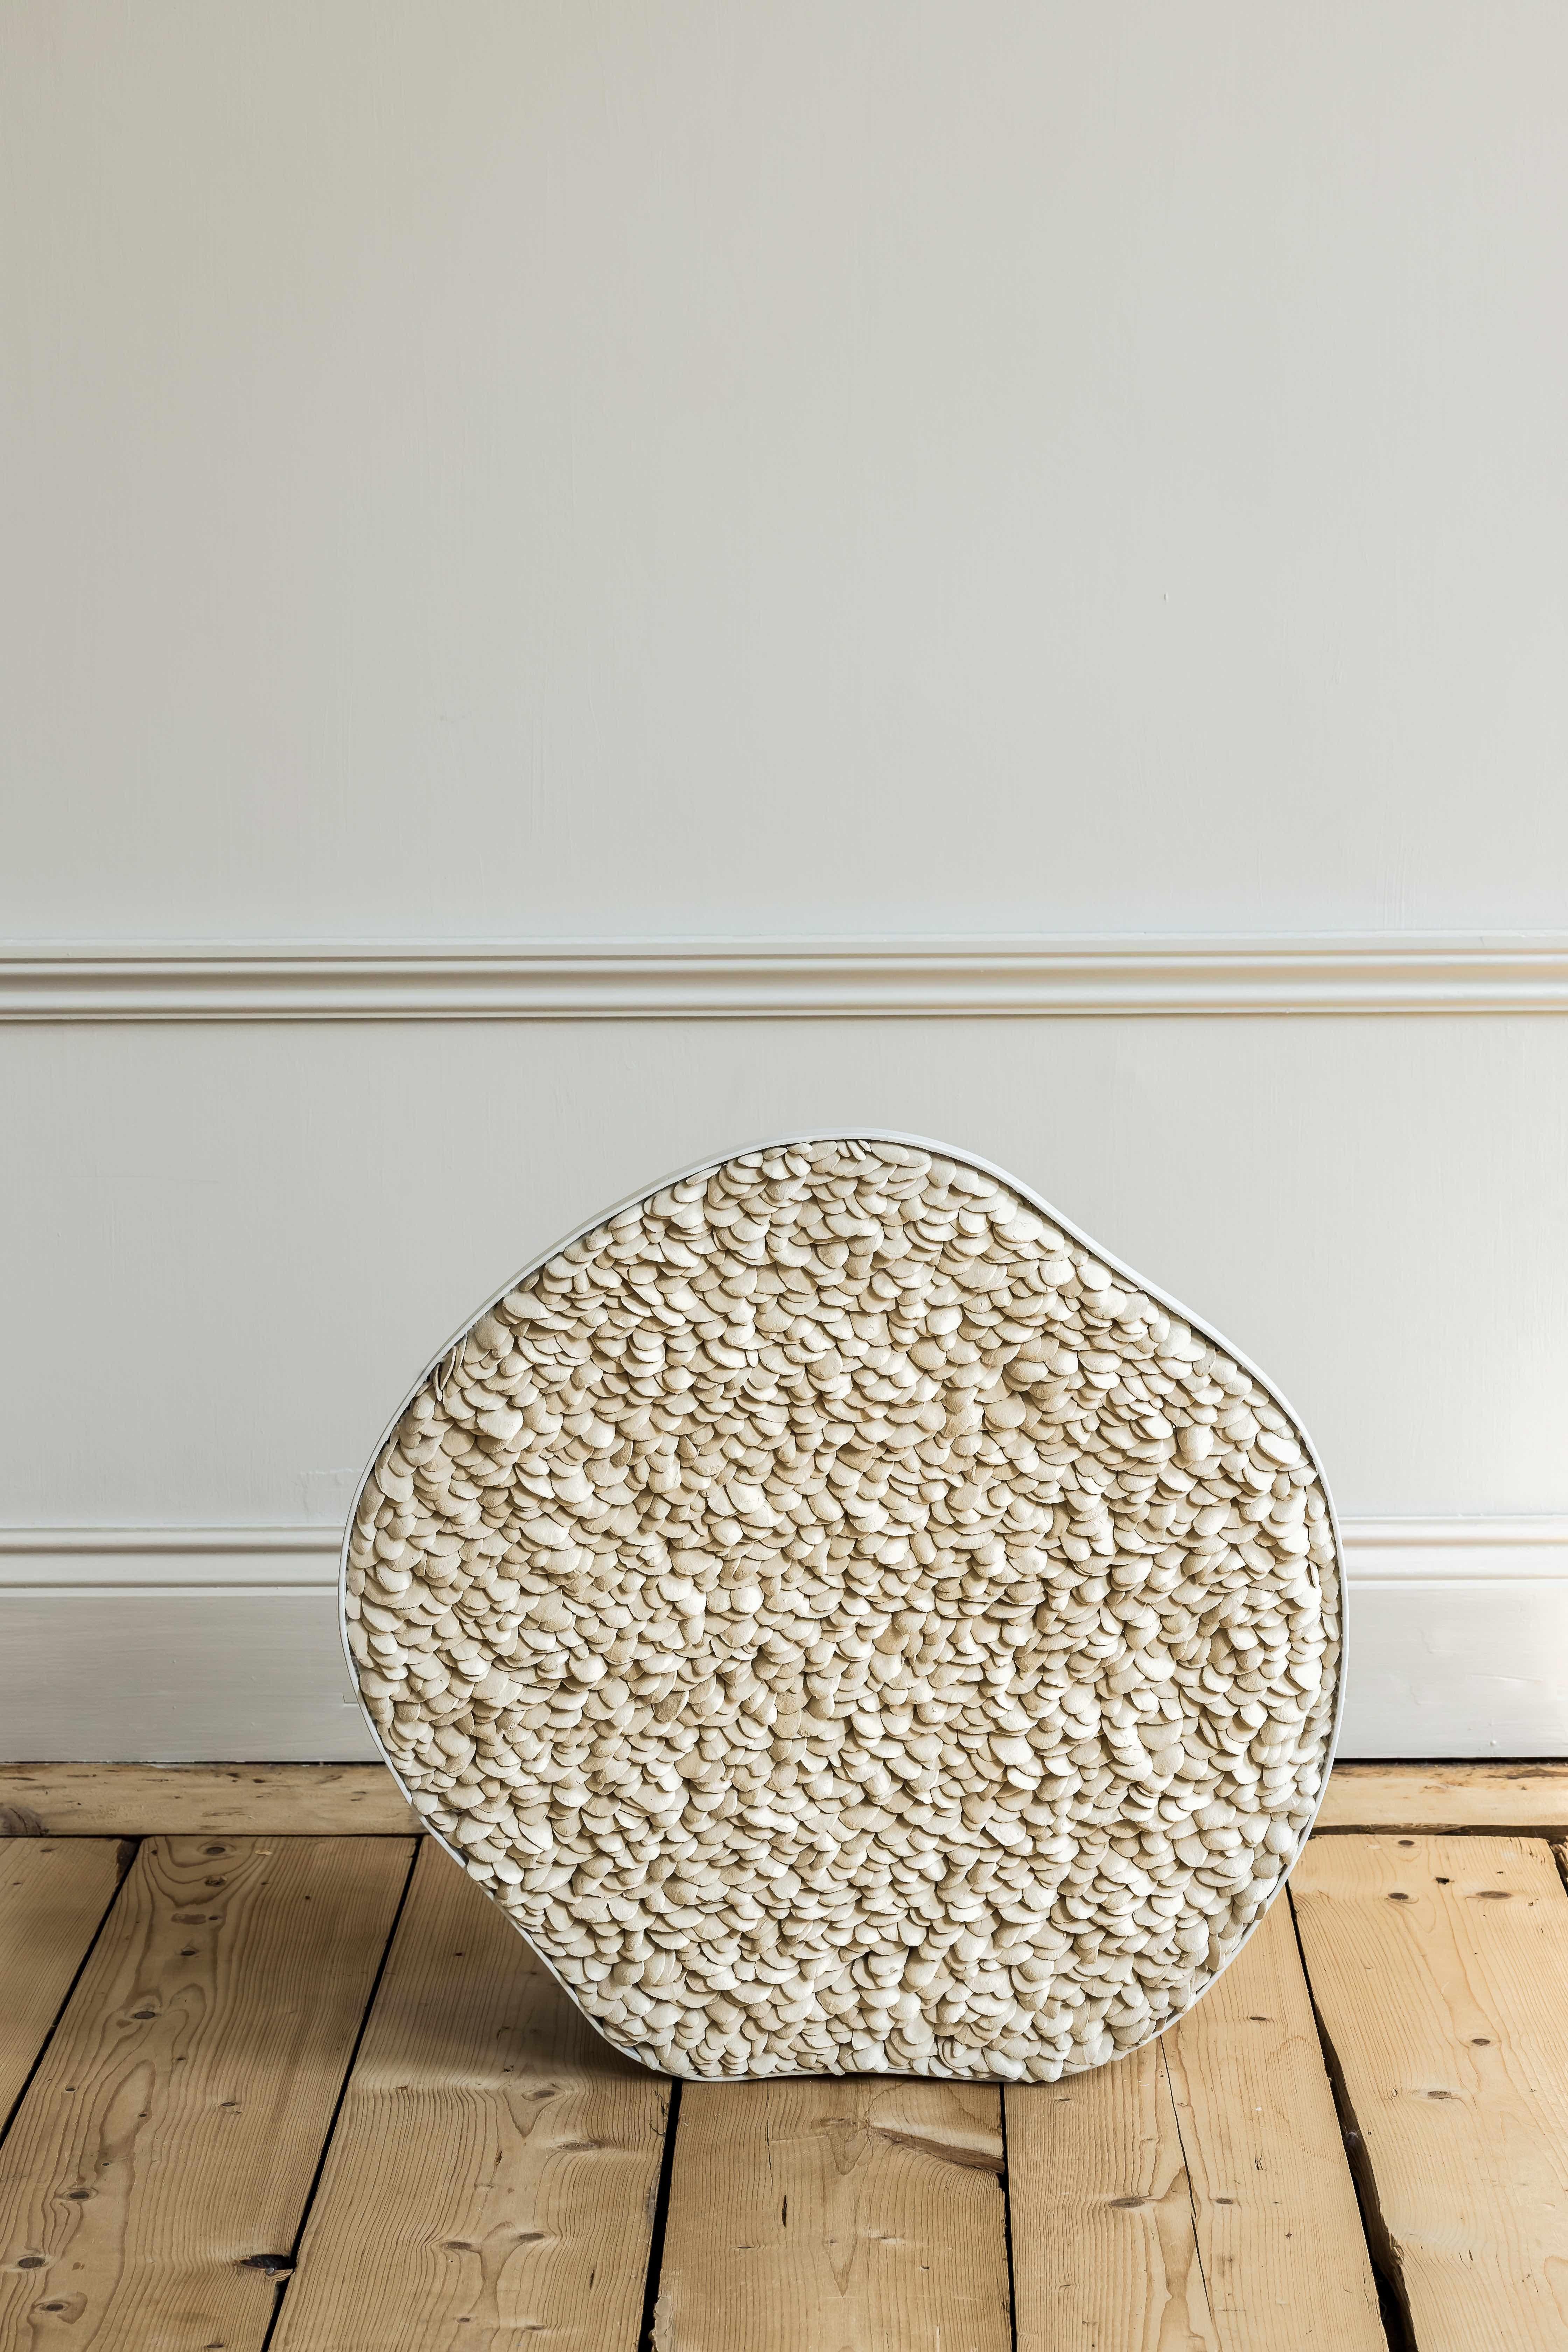 Eana rug by Hanna Heino
Dimensions: D 4 x W 55 x H 55 cm
Materials: Handbuilt, clay, porcelain, aluminium.


Hanna Heino is a contemporary clay artist from Finland known for her delicate form language that honours the beauty and subtle nuances